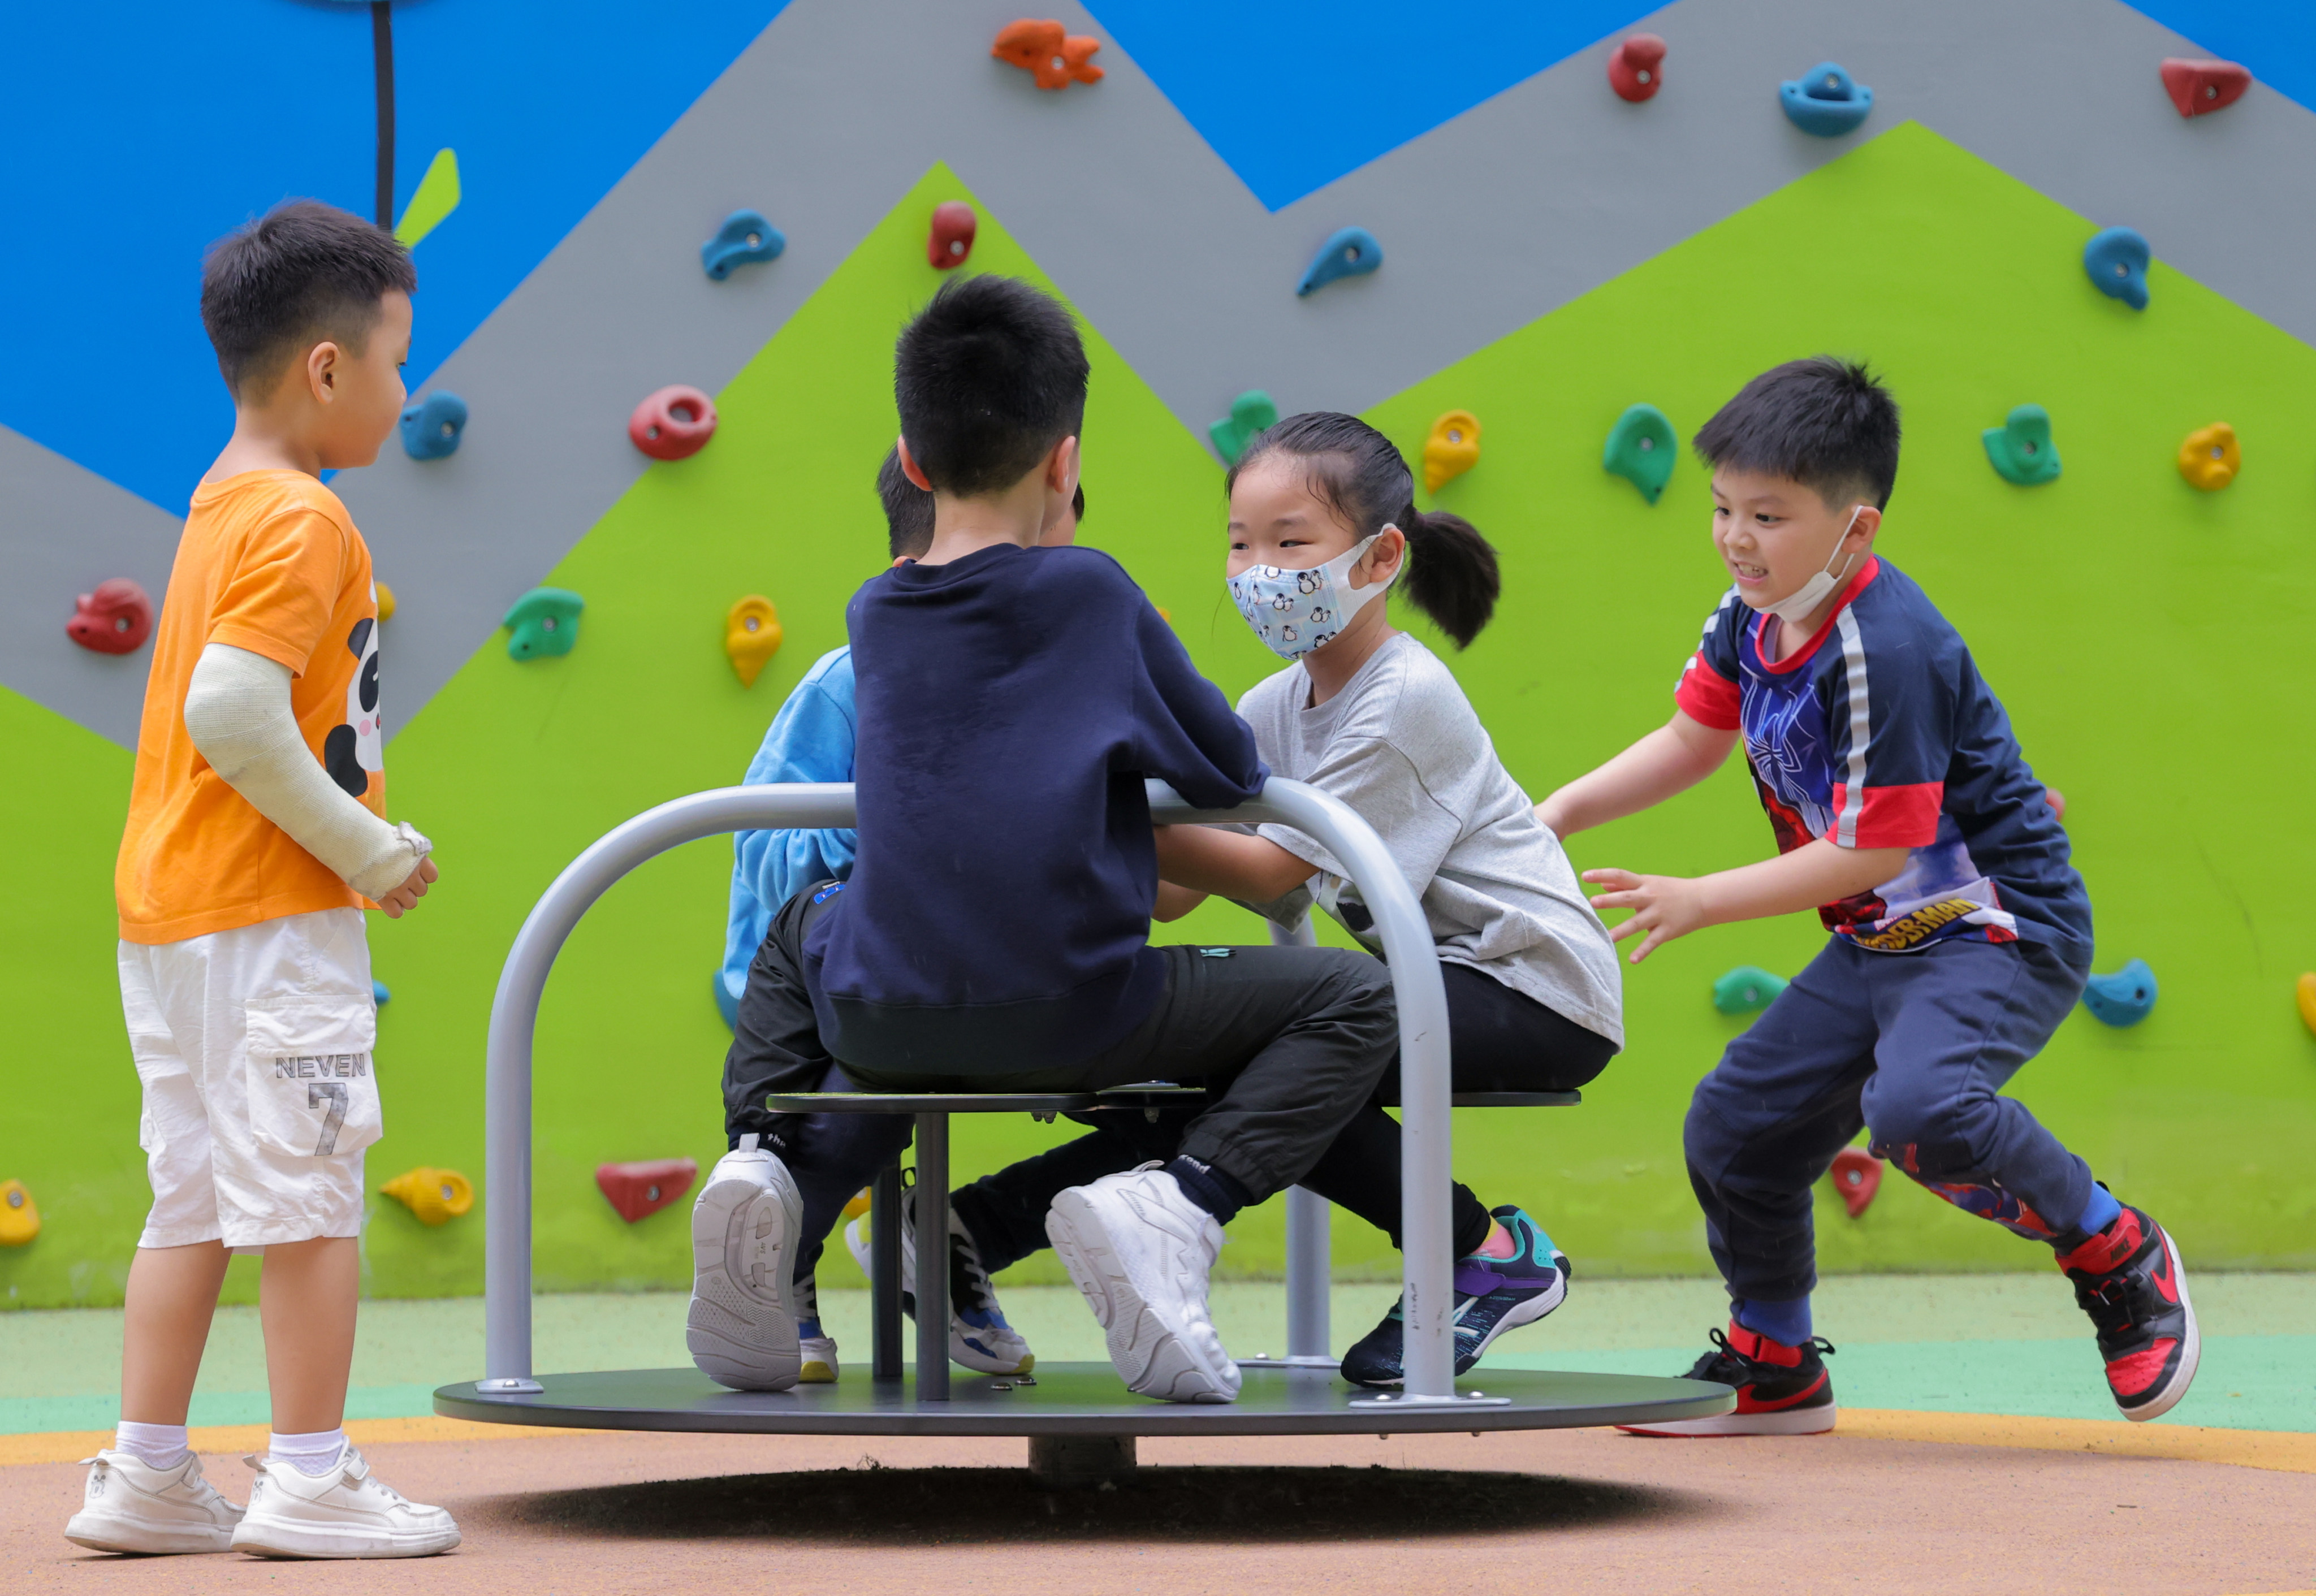 Of eight children treated with severe flu in the summer in Hong Kong, only two had been vaccinated. Photo: Jelly Tse